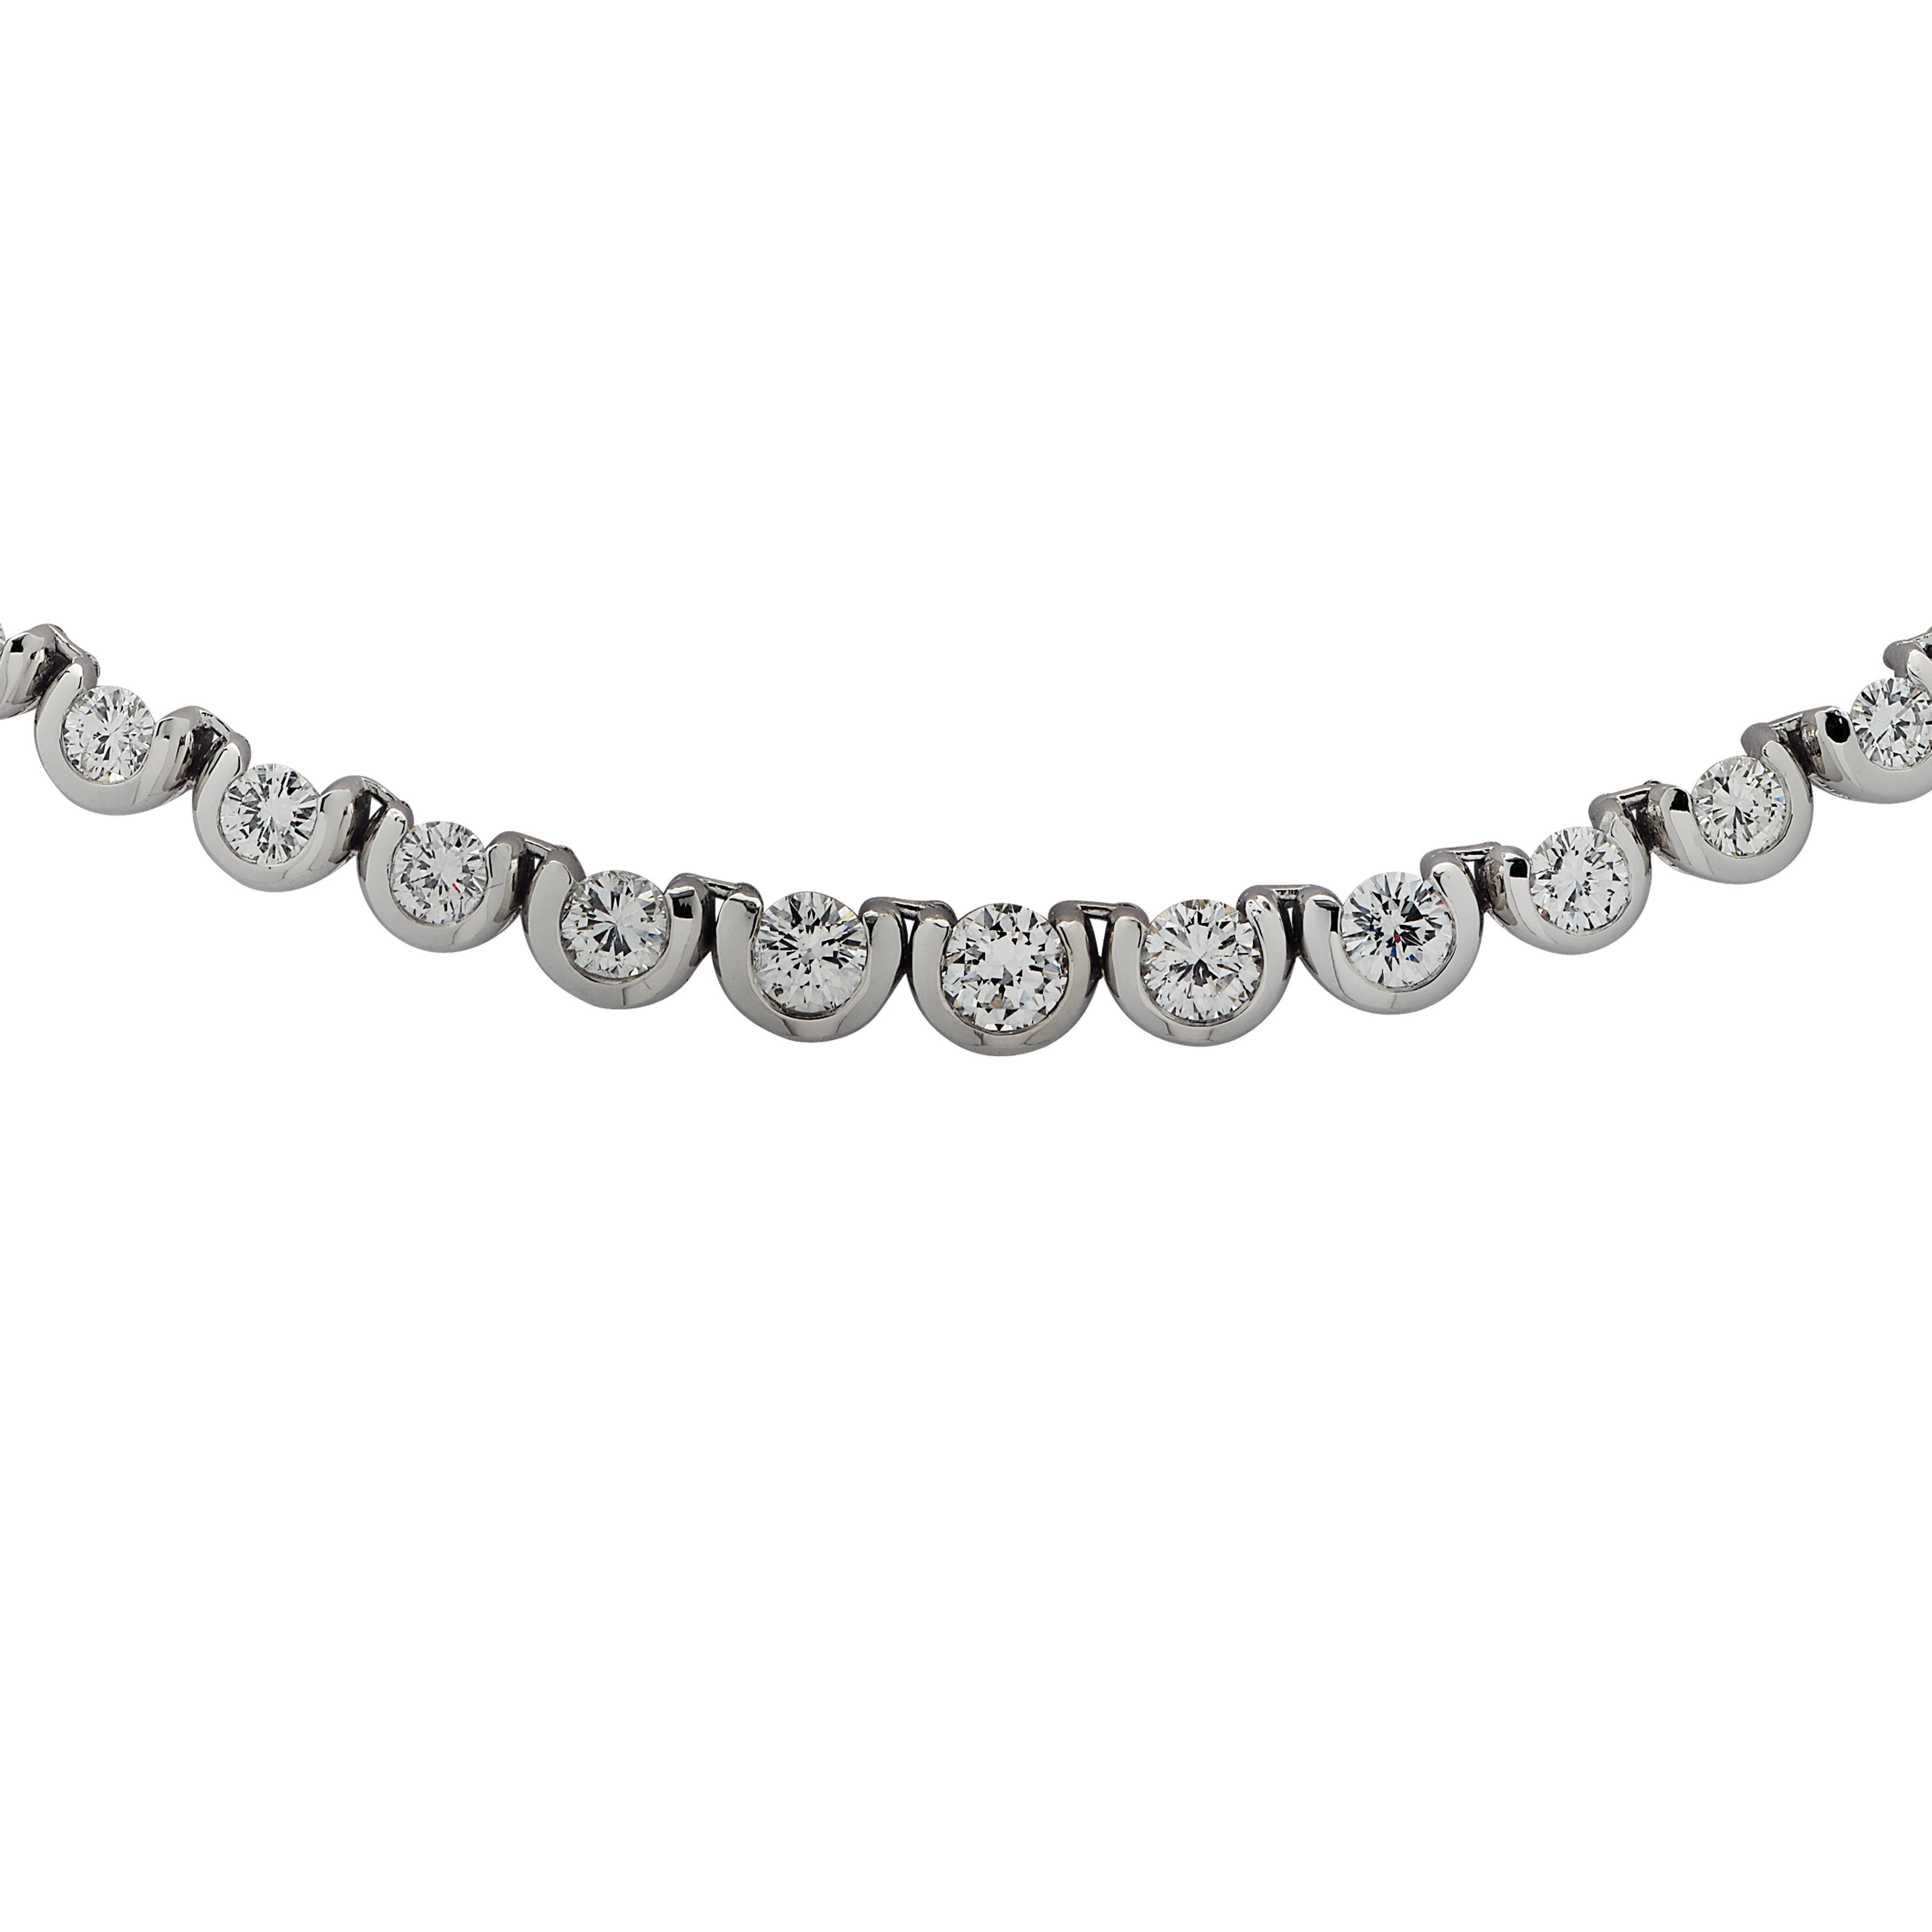 Exquisite diamond necklace crafted in 18 Karat white gold, showcasing 68 round brilliant cut diamonds weighing approximately 12 carats total, G color, SI Clarity. The diamonds are set in a half bezel creating a spectacular symphony of brilliance and